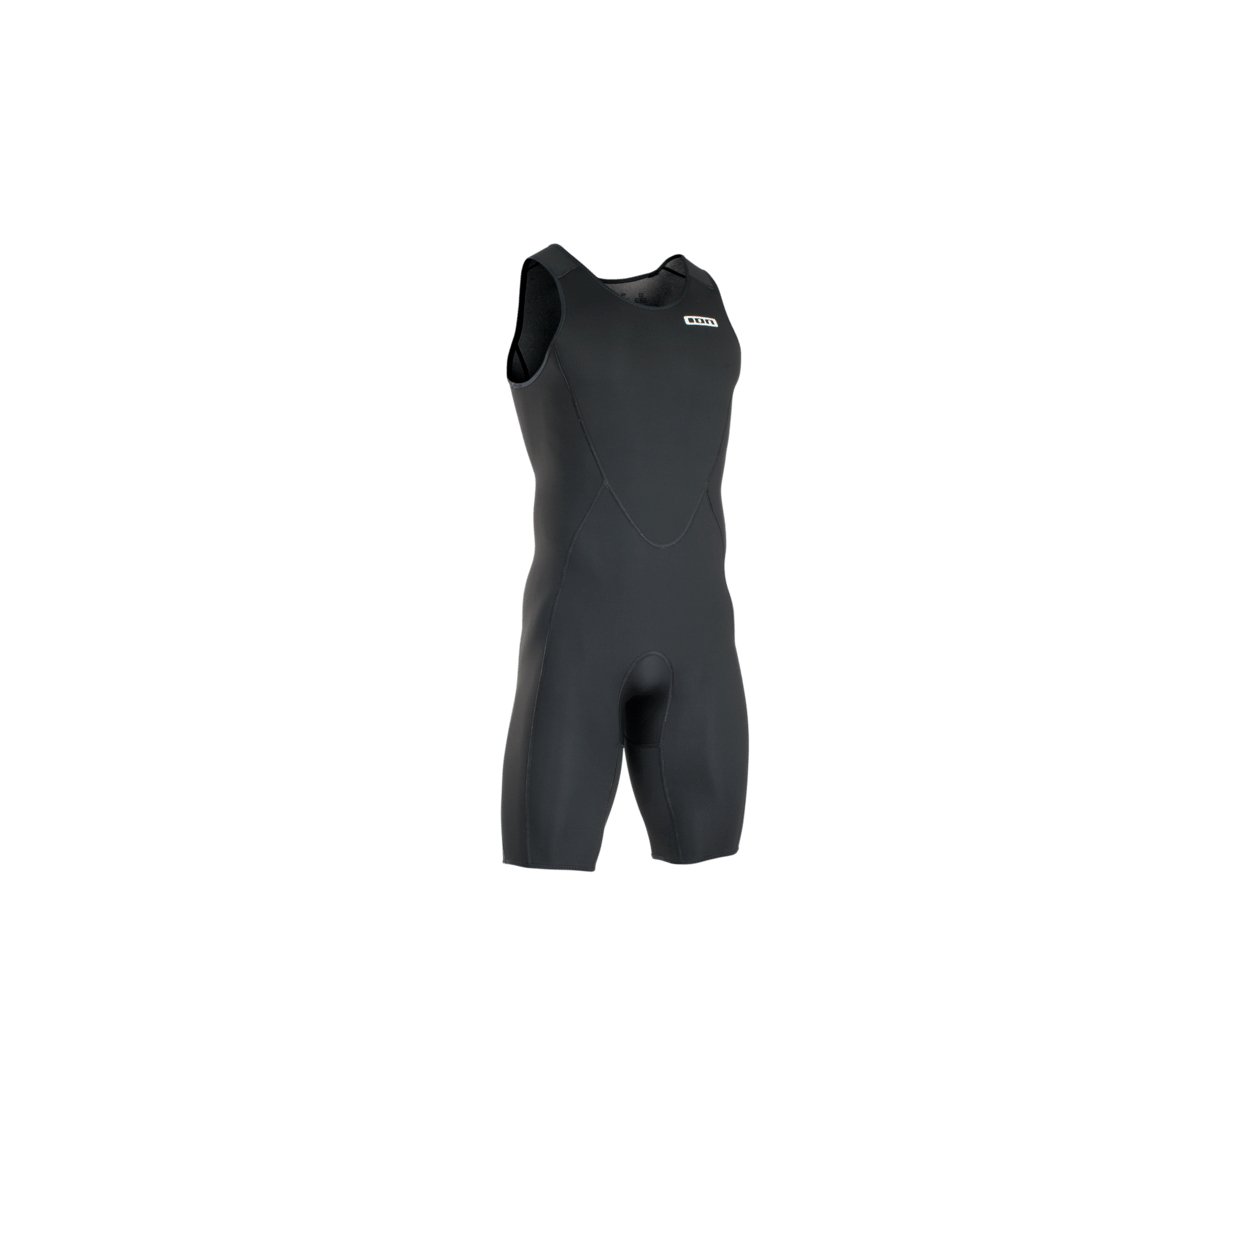 ION Monoshorty 0.5 2022 - Worthing Watersports - 9008415881253 - Wetsuits - ION Water